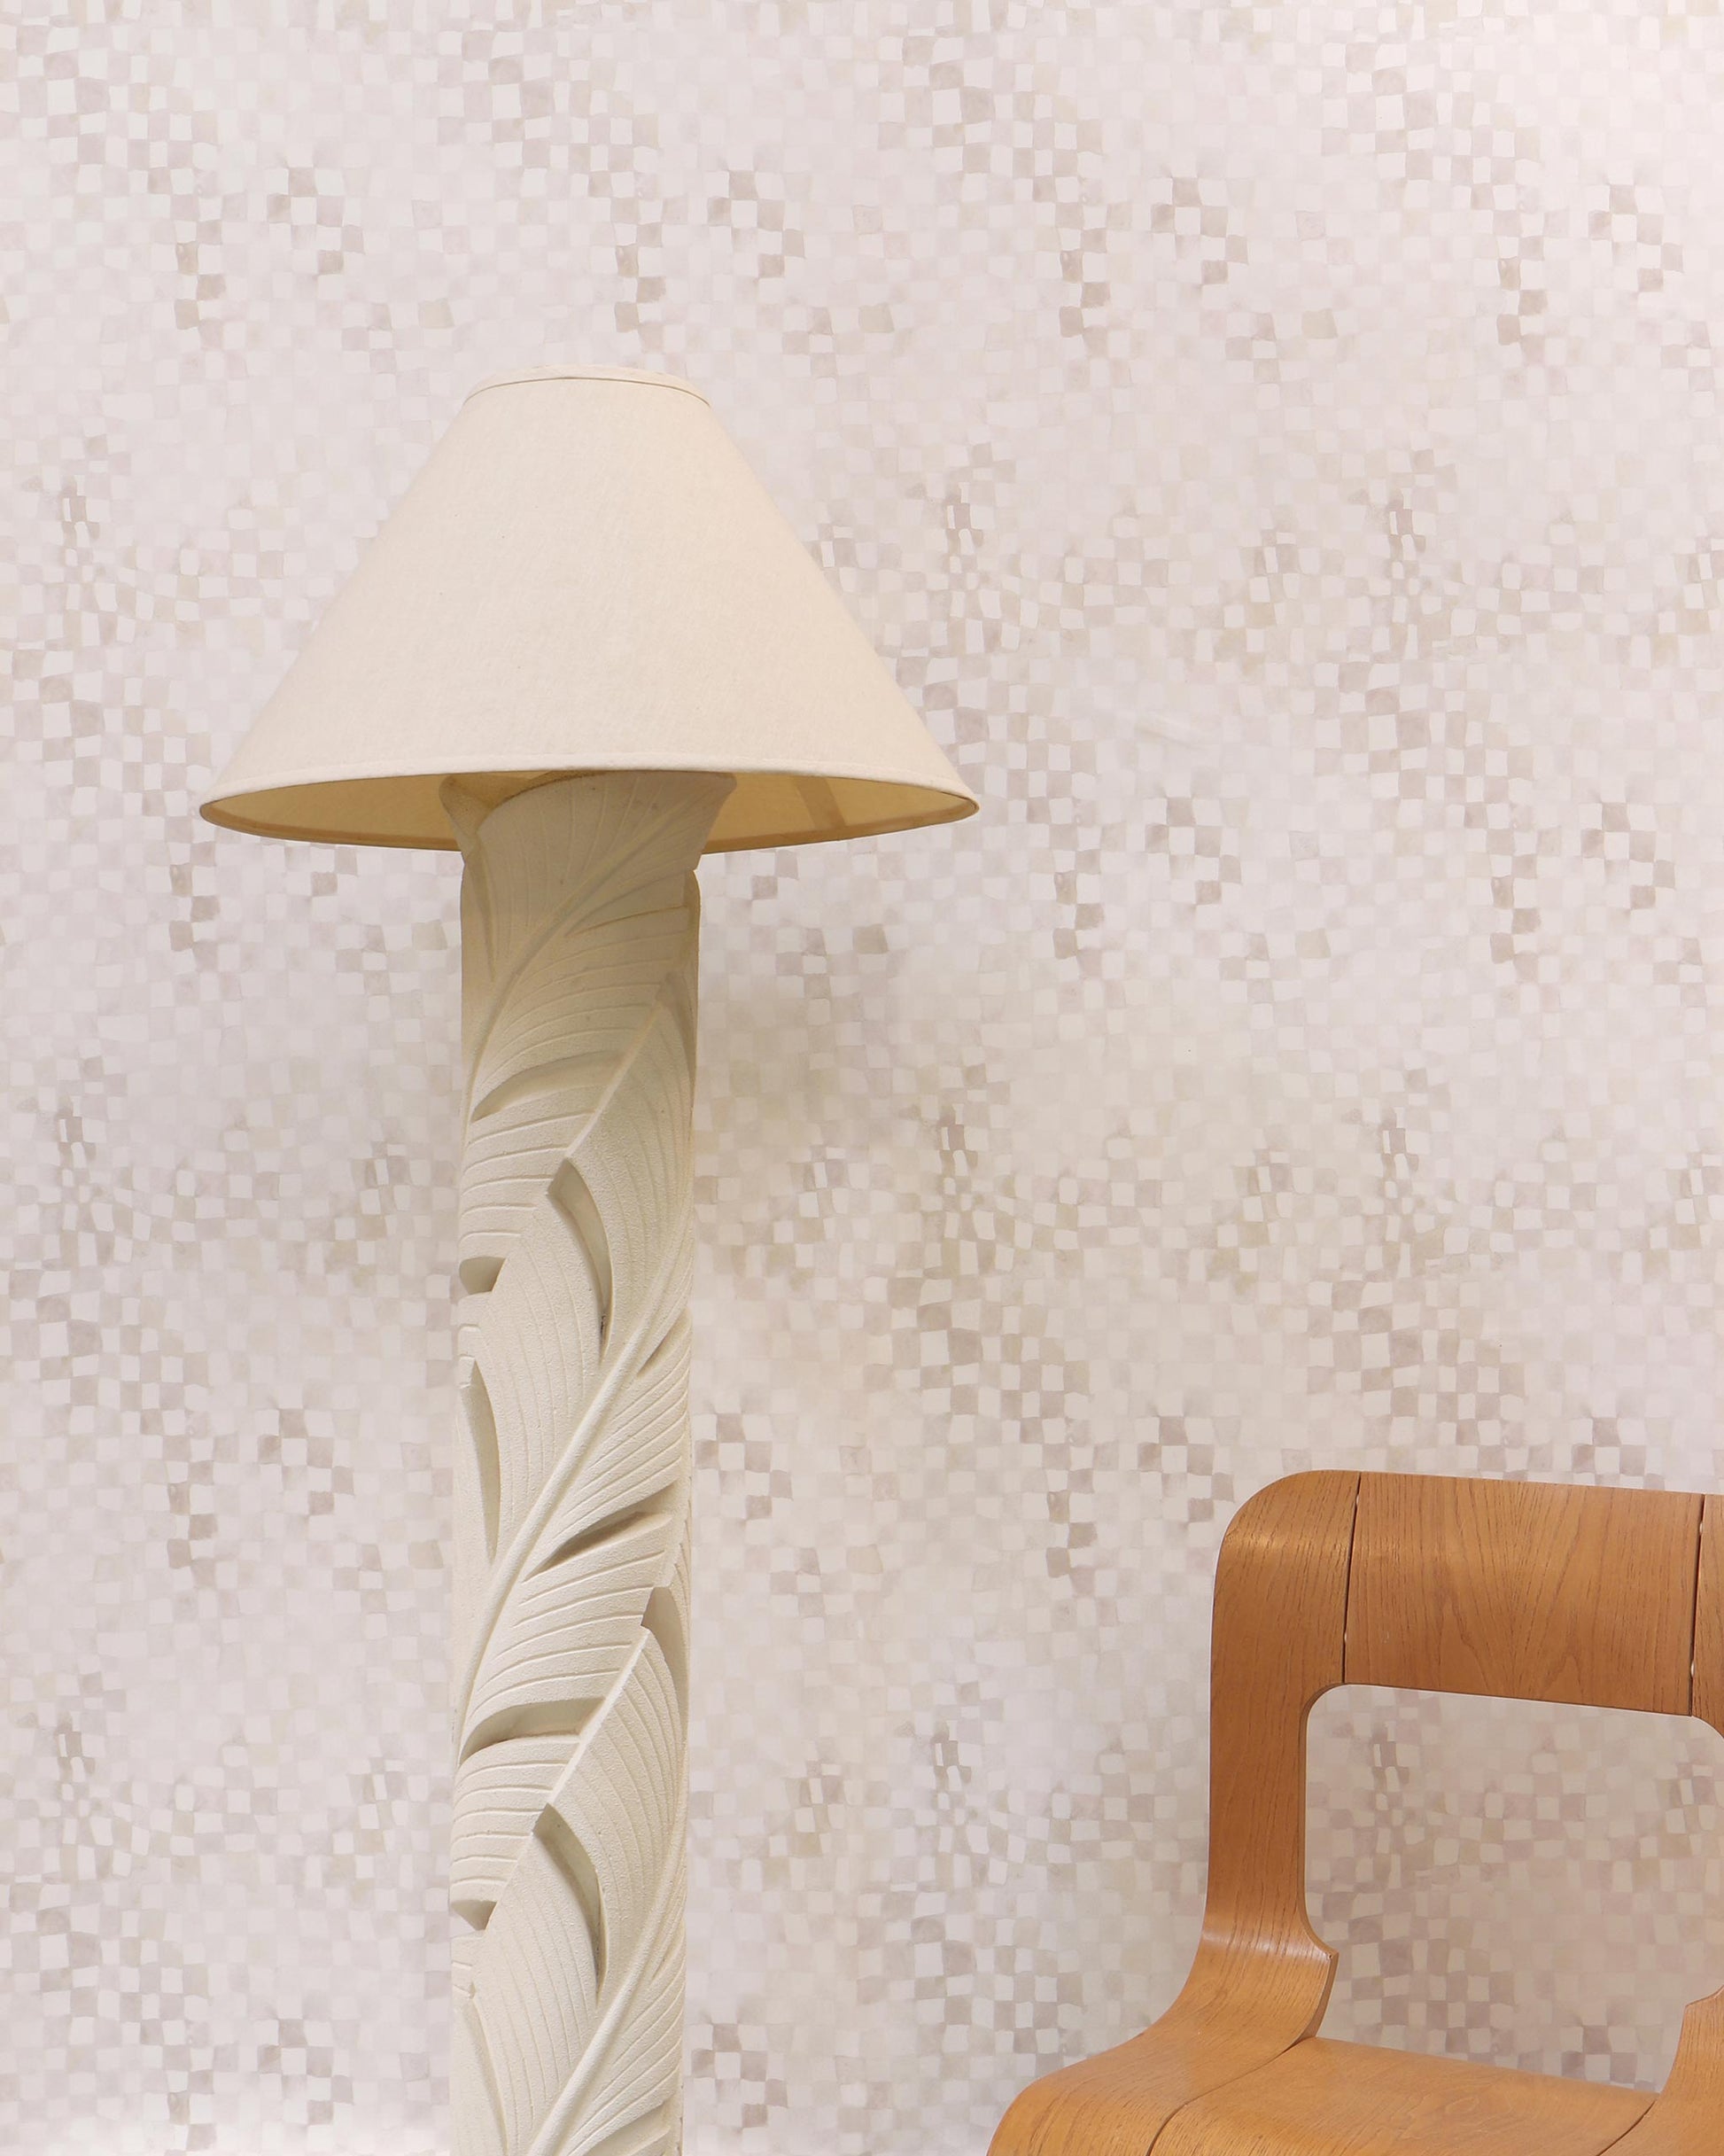 A wooden chair next to a floor lamp with Chess Wallpaper||Sol.